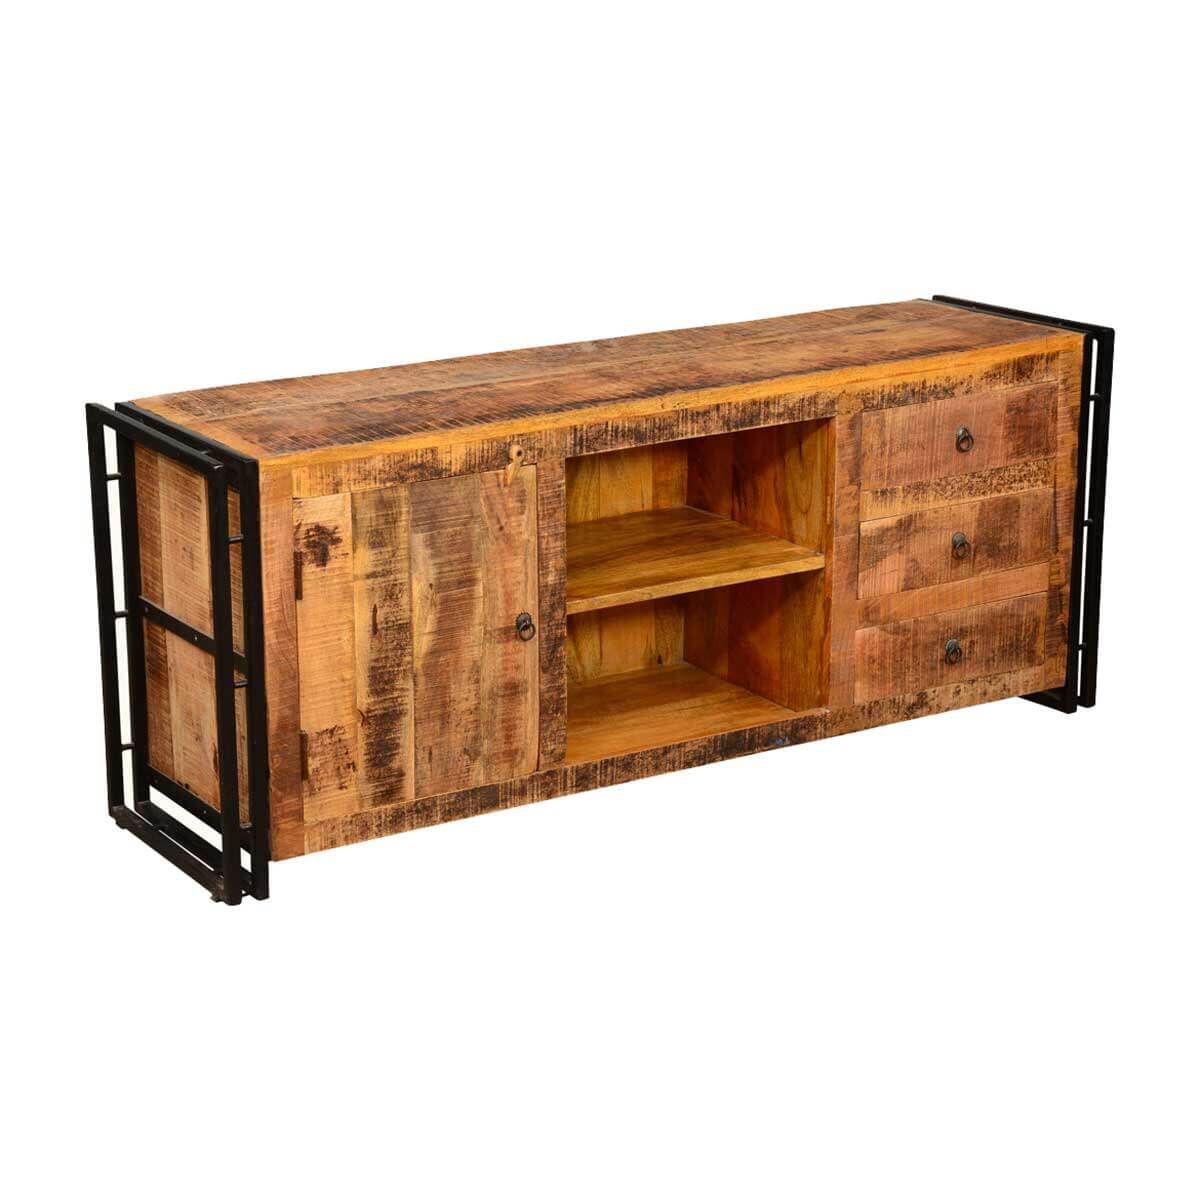 Farmingdale Pioneer Rustic Mango Wood Tv Stand Media With Rustic Wood Tv Cabinets (View 5 of 15)